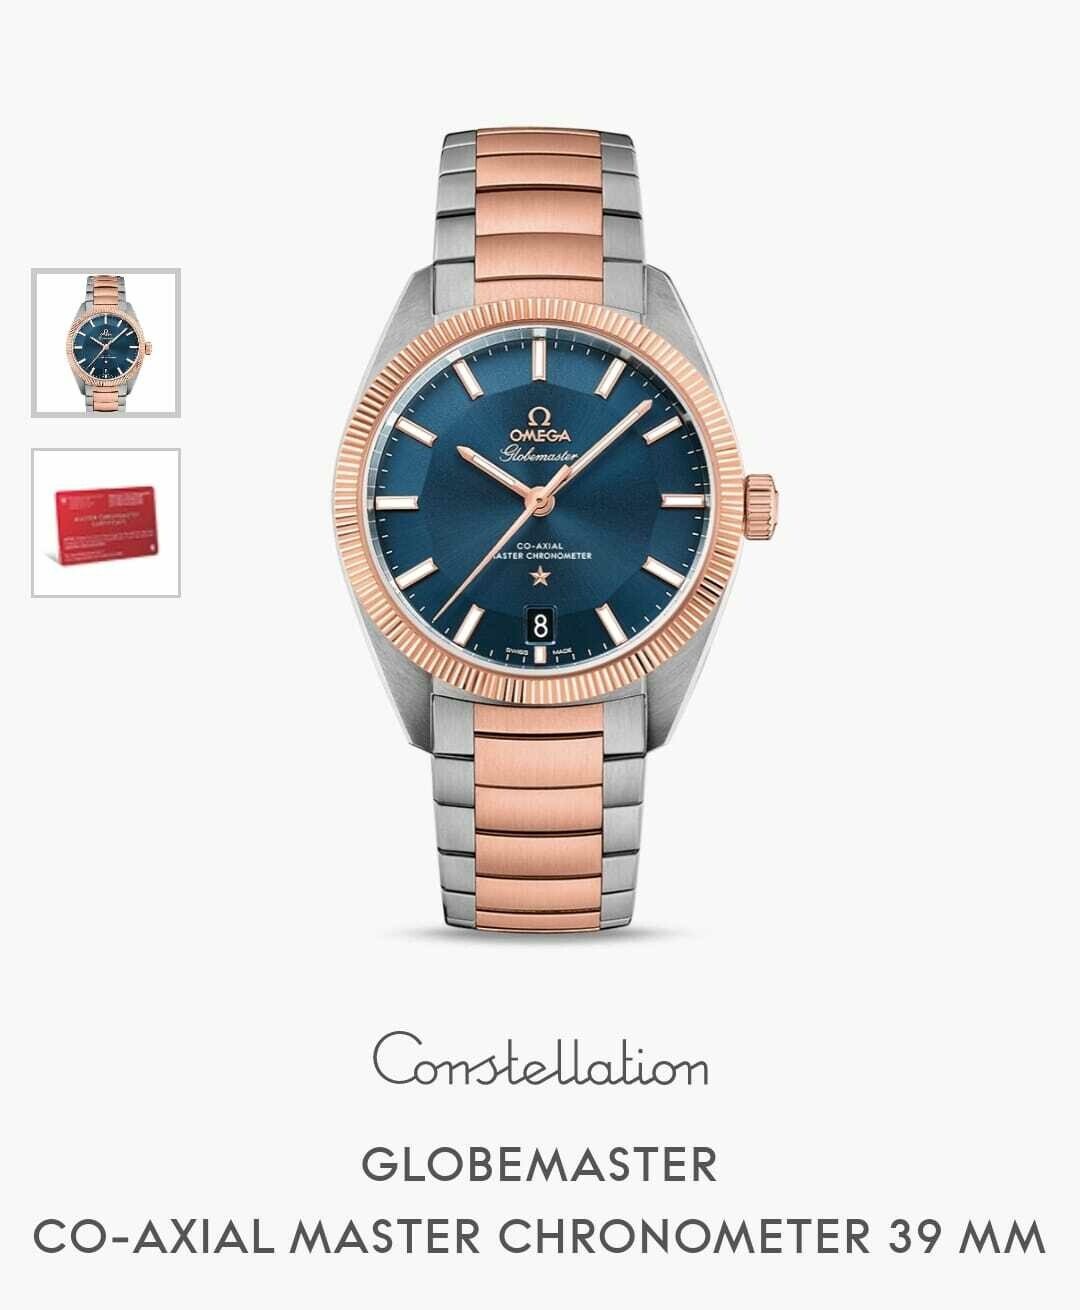 Omega Constellation Globemaster Blue Dial 2018 Full set for Rs.450,748 for  sale from a Trusted Seller on Chrono24